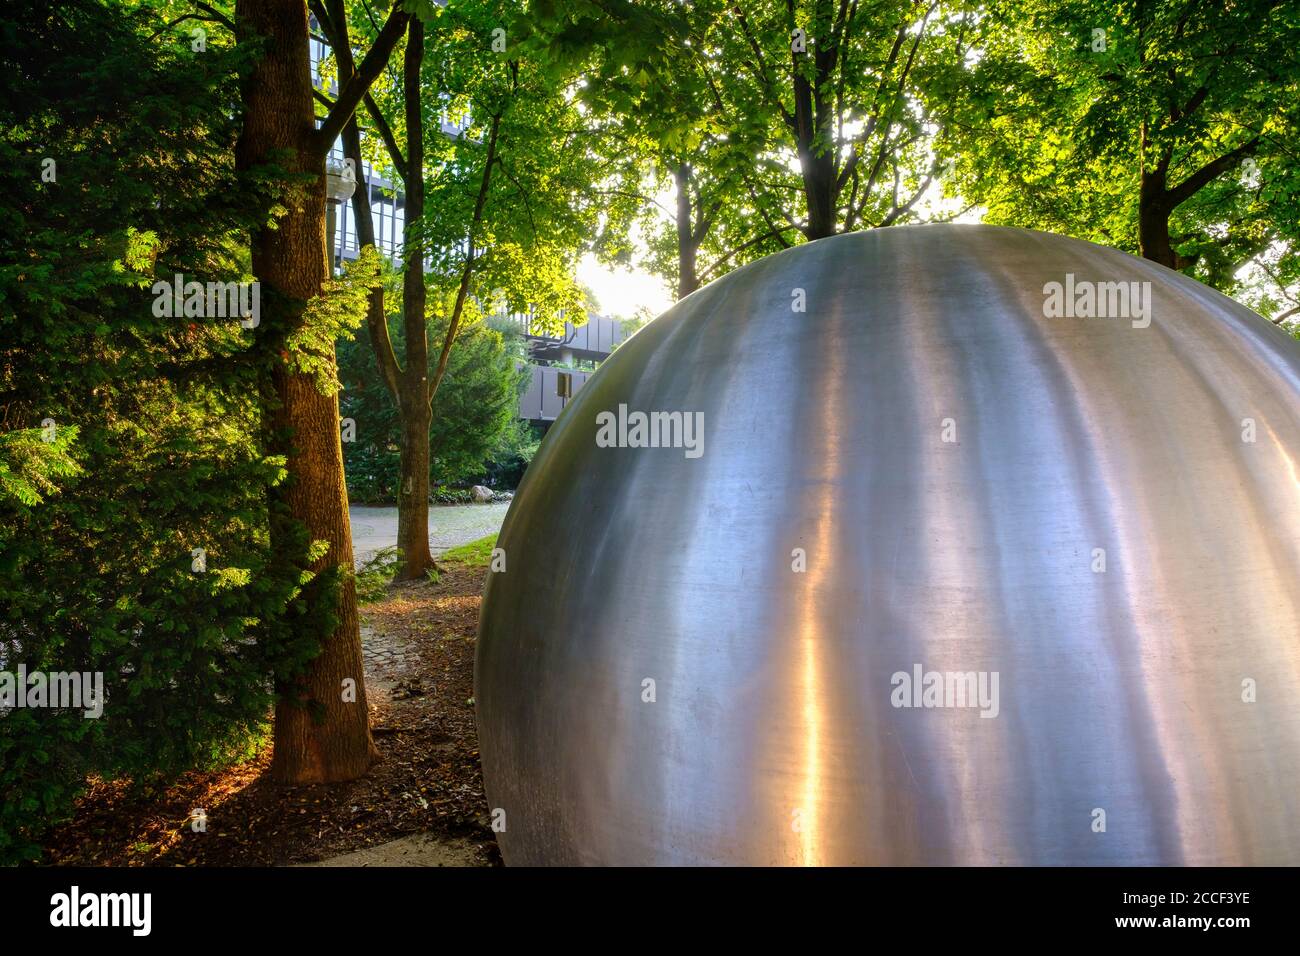 Stainless steel balls and spherical caps by André Volten, 1980, at the European Patent Office, Isarvorstadt, Munich, Upper Bavaria, Bavaria, Germany Stock Photo